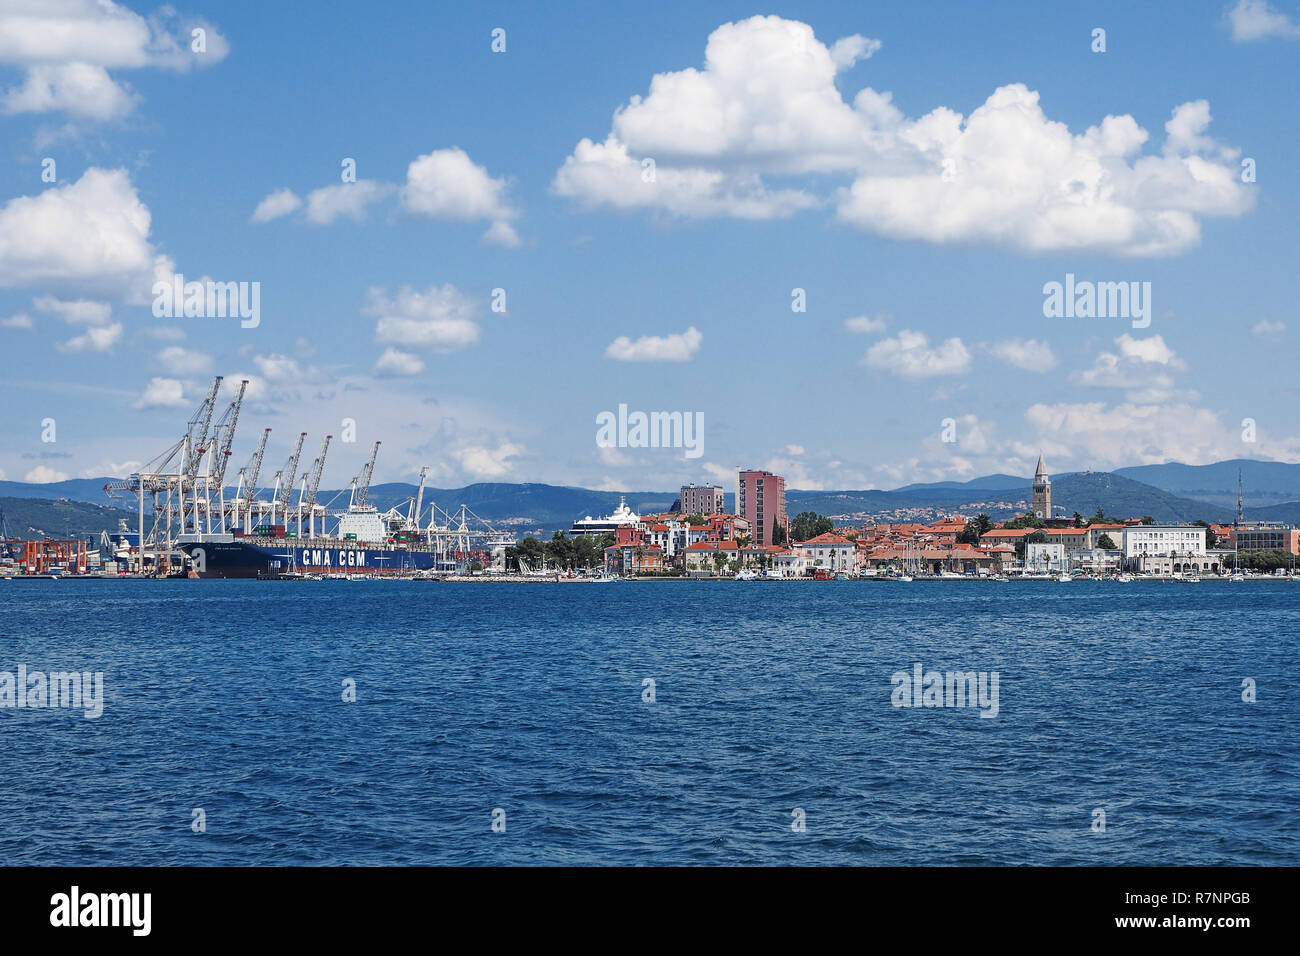 View of town Koper  in Slovenian Istria on the Adriatic coast with maritime port Stock Photo